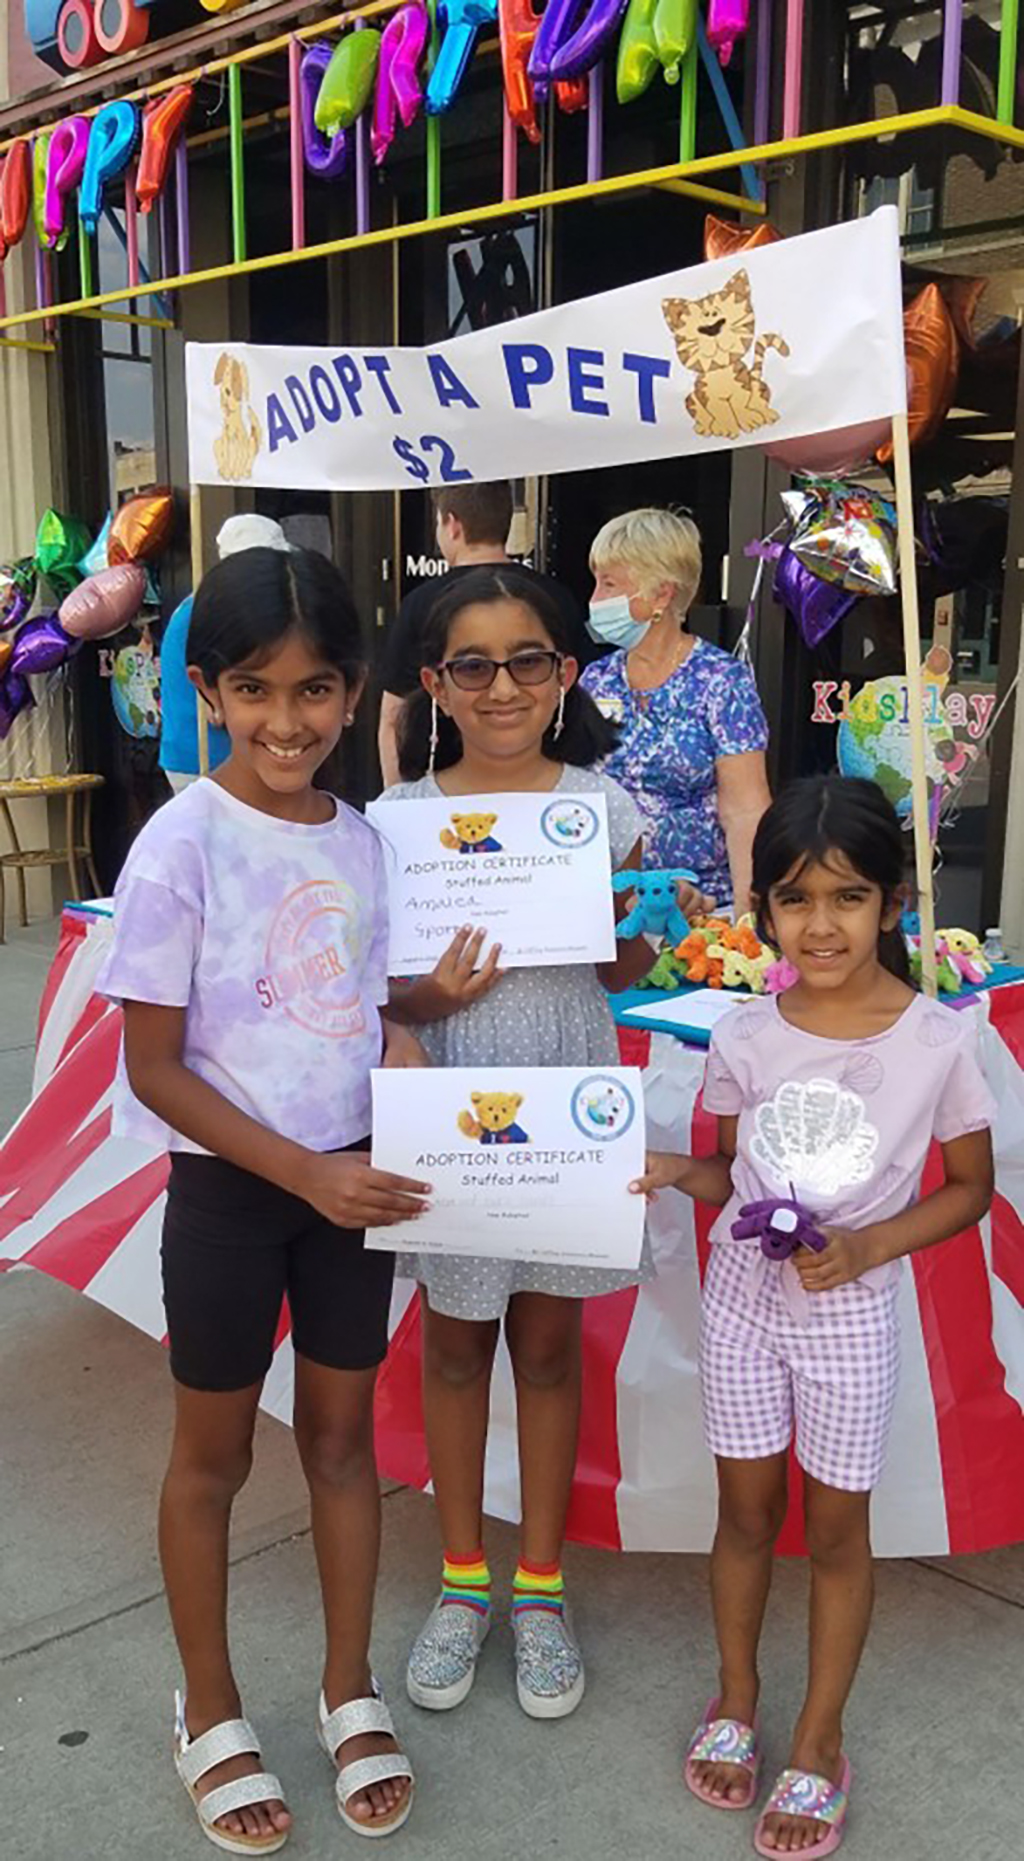 KidsPlay Birthday - 4 little girls in front of an Adopt a Pet booth holding Adoption Certificates for stuffed Animals.